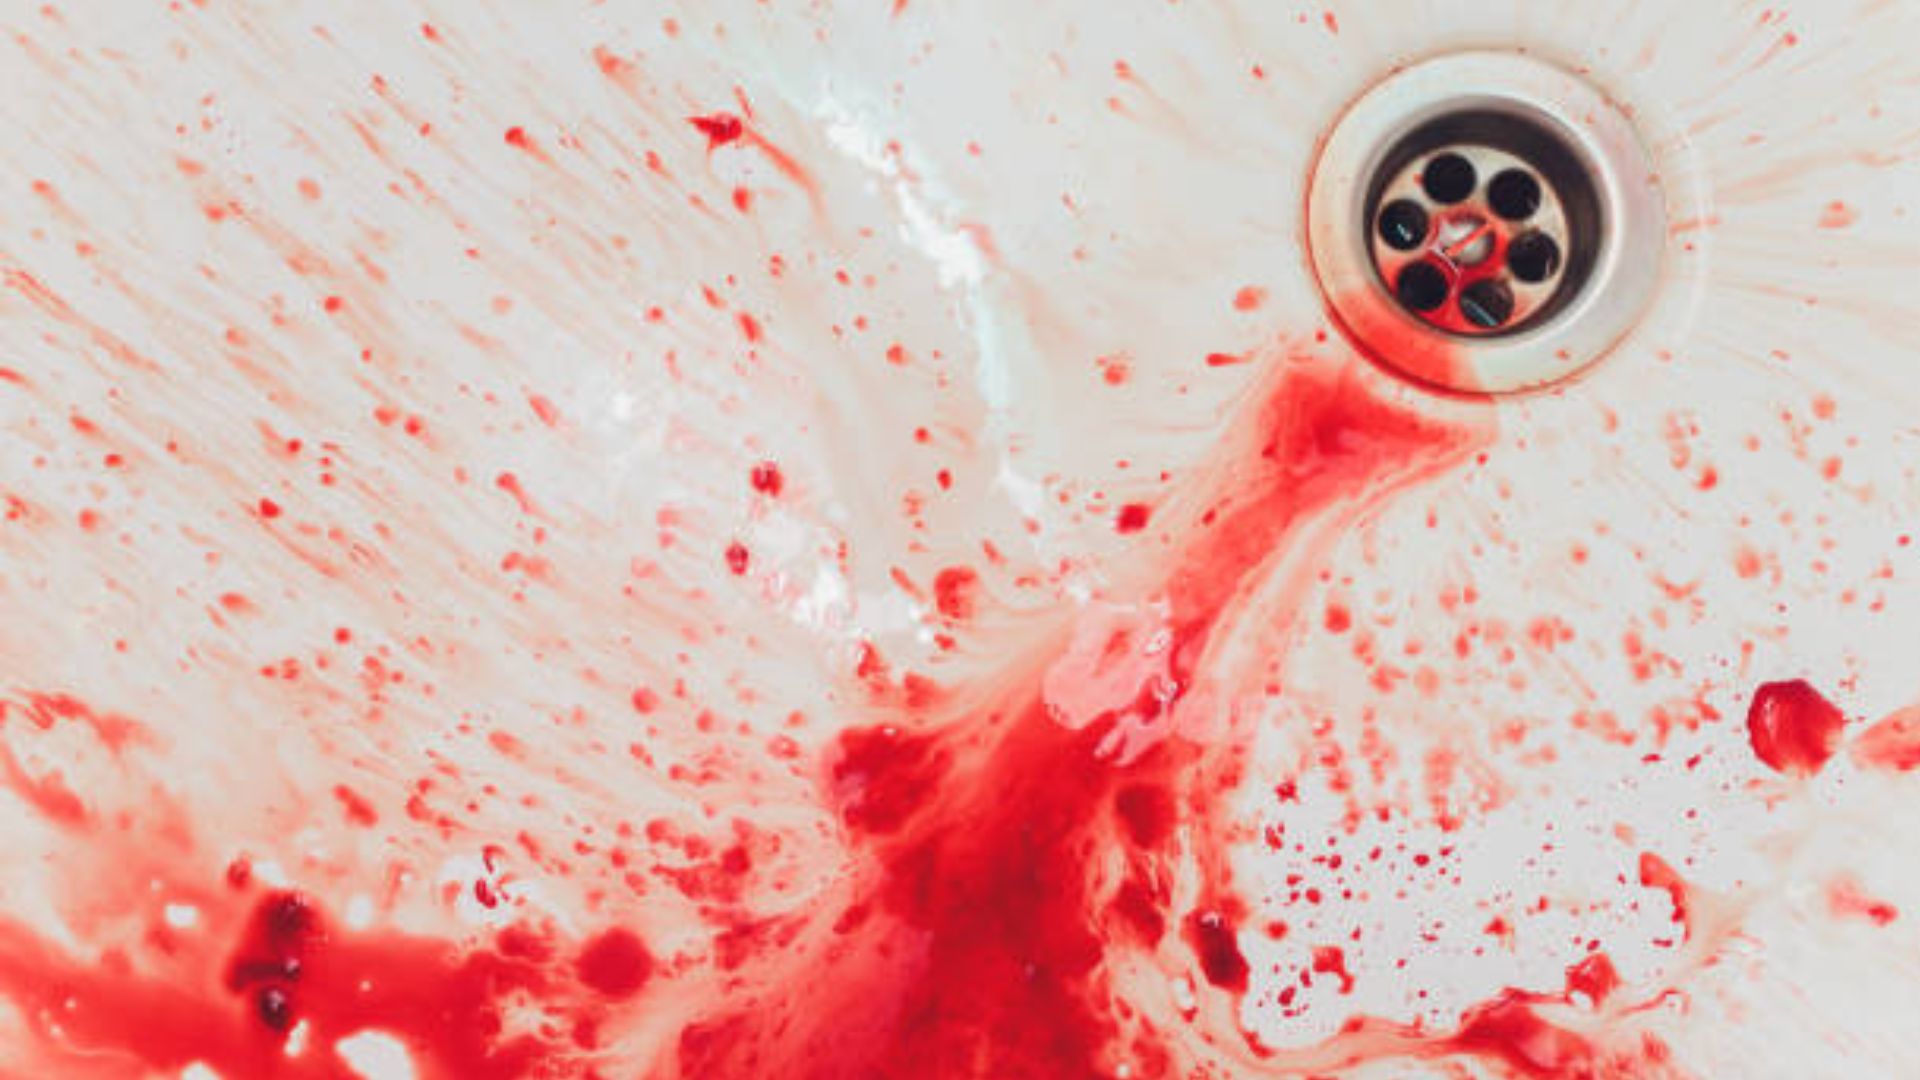 Blood In The Sink